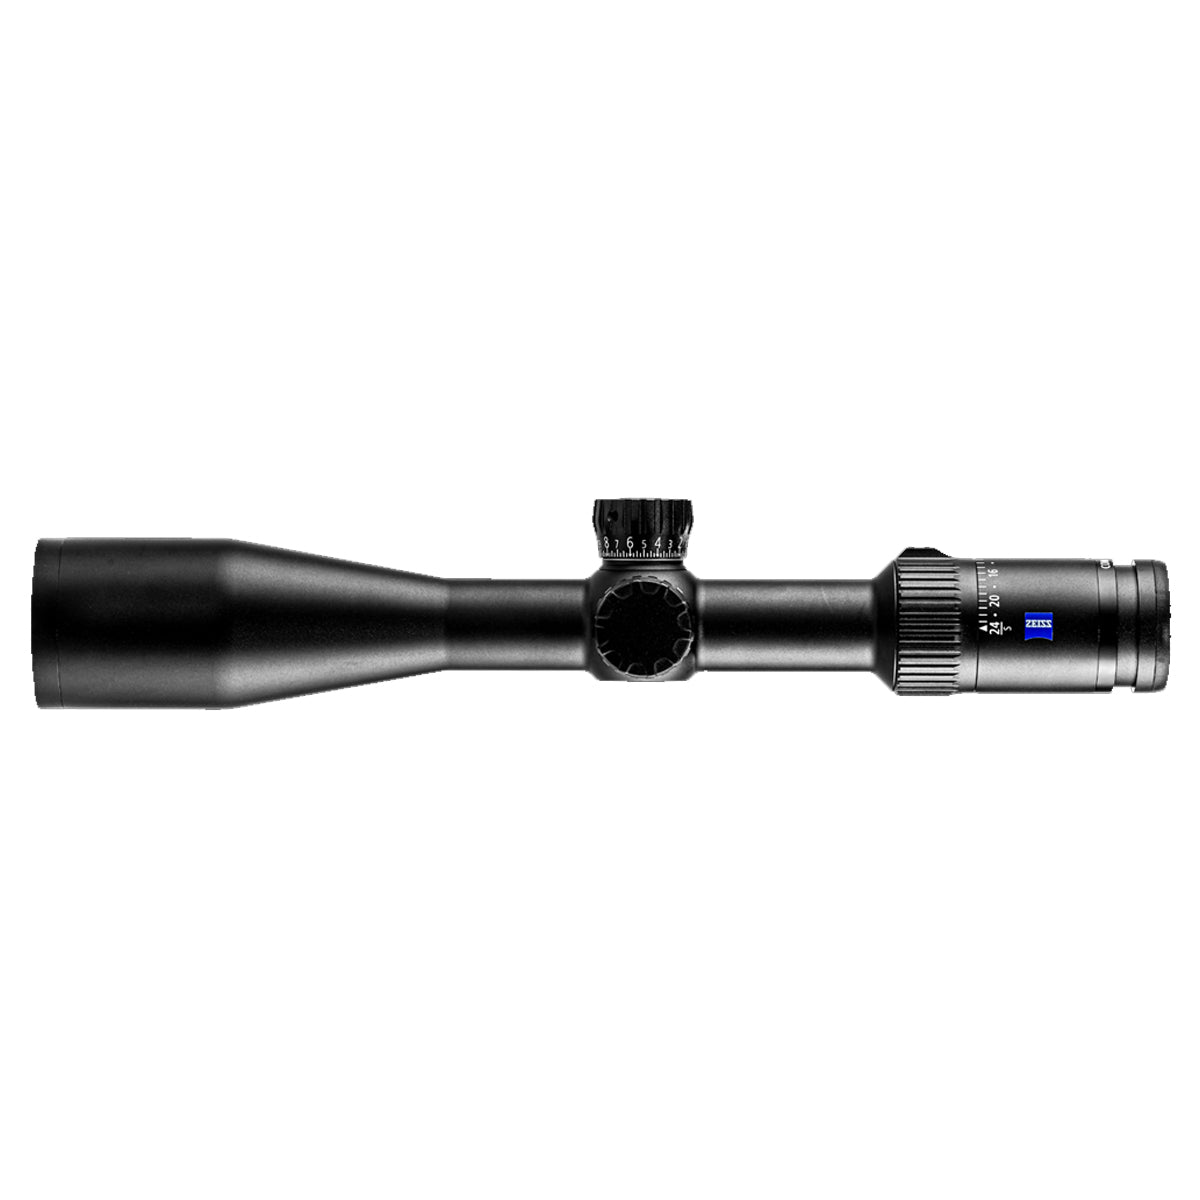 Zeiss Conquest V4 6-24x50 with ZMOAi-20 Illuminated #89 Reticle Ext. Locking Windage Rifle Scope in  by GOHUNT | Zeiss - GOHUNT Shop